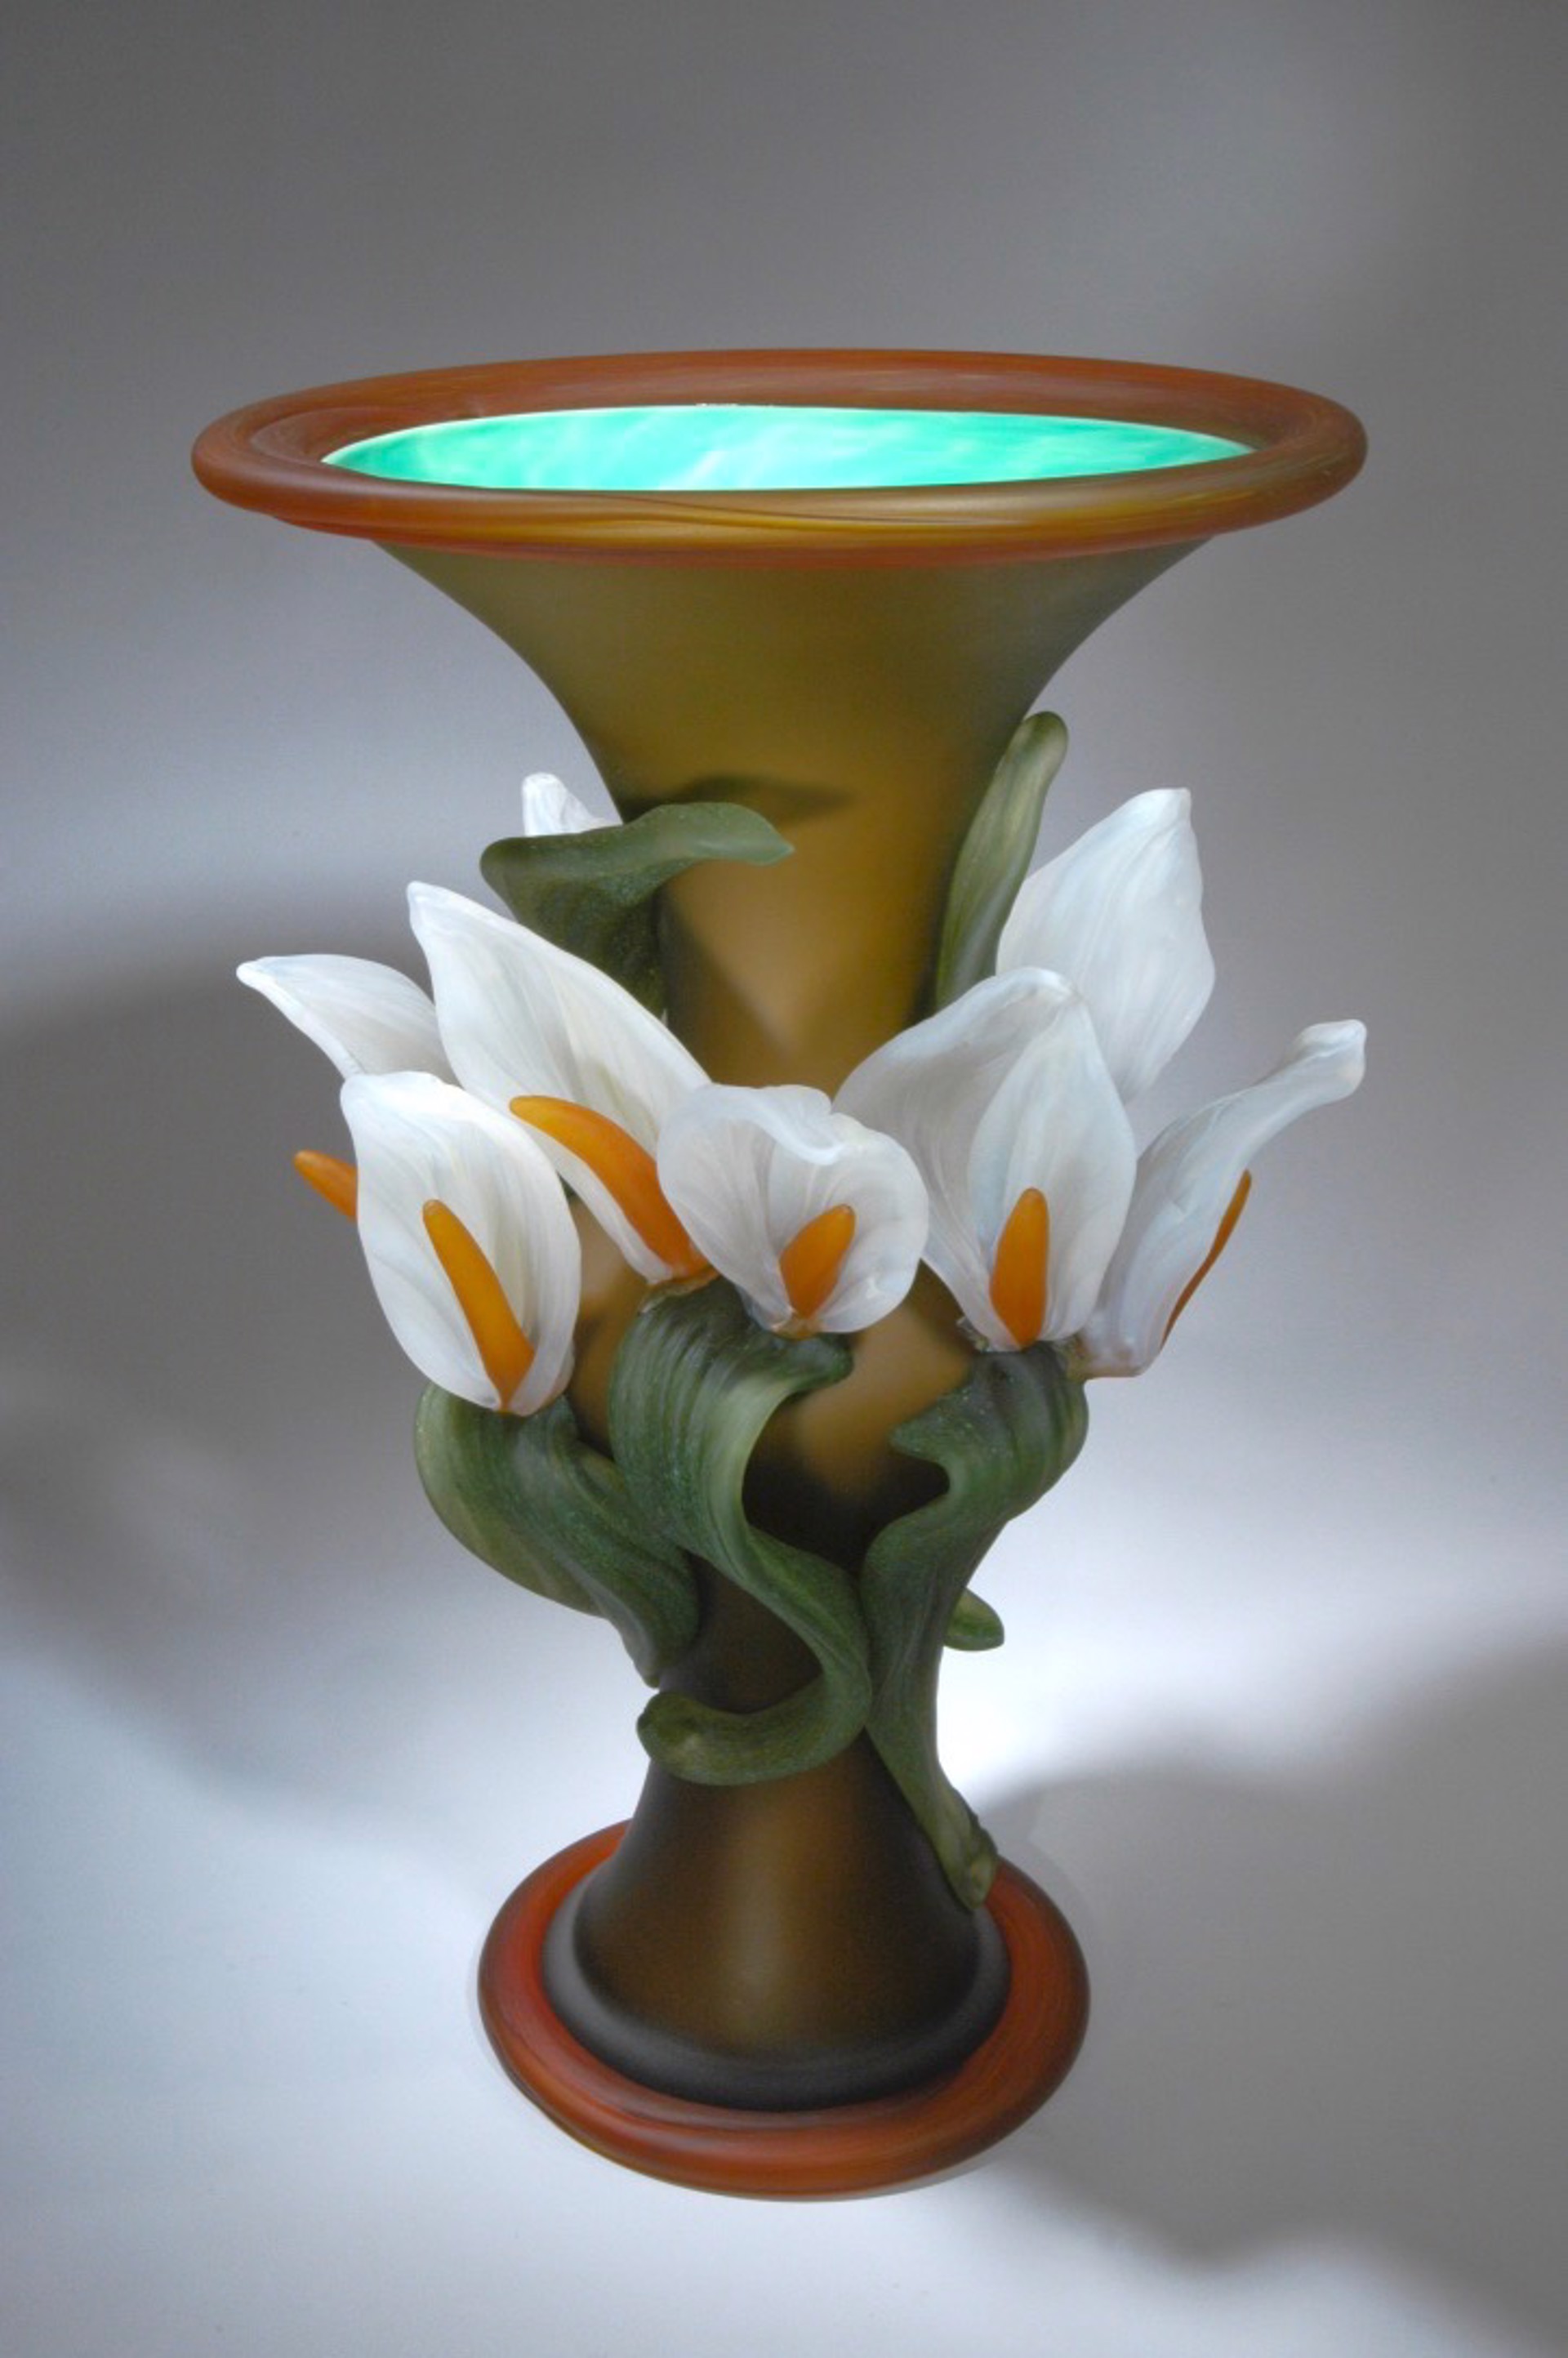 Smokey Topaz over Green with White Calla Lily (10 flower) by Susan Rankin